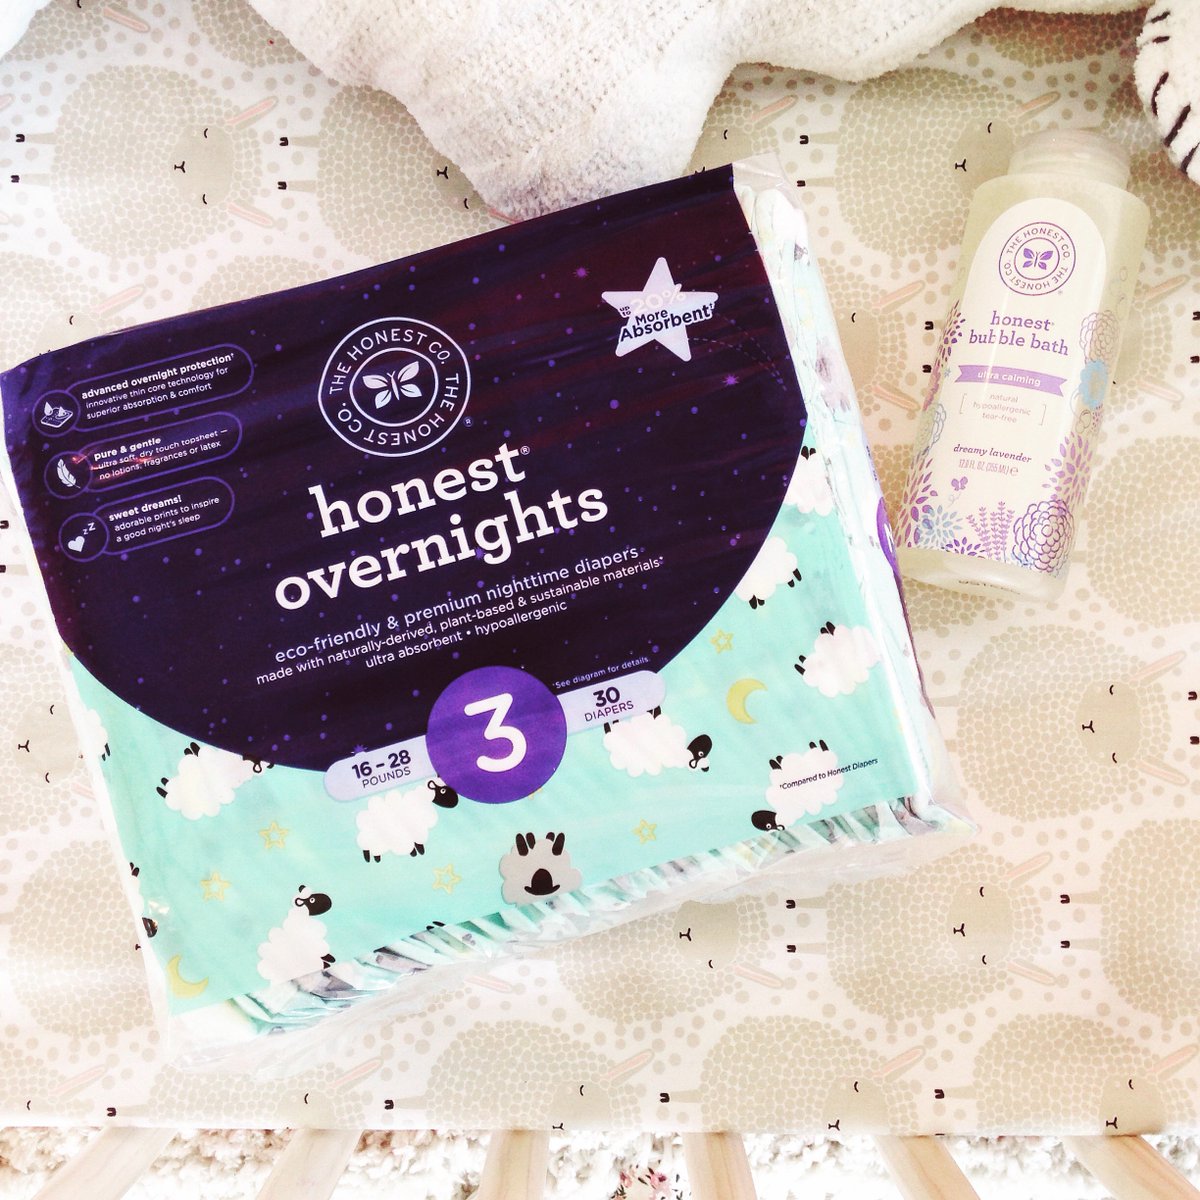 RT @Honest: Recipe for sweet dreams? Meet our Lavender Bubble Bath and Overnight Diapers! Both available @Target #MadeToMatter https://t.co…